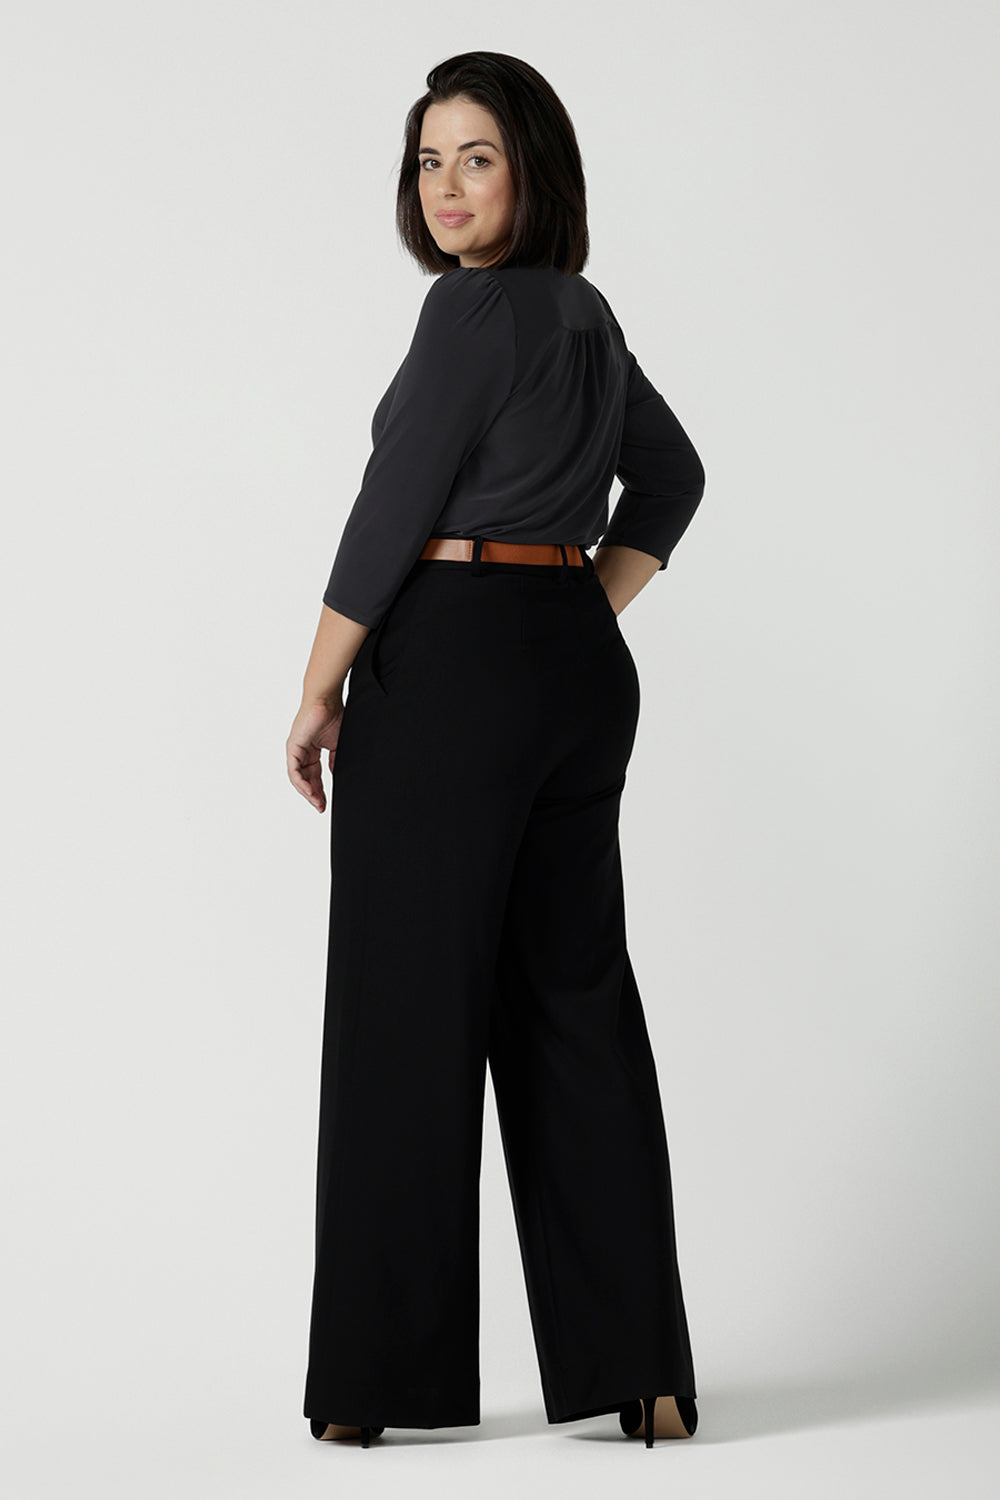 Back view of size 10 woman wears the Kade pant in black, a softly tailored black pant in ponte jersey. Functioning fly front, belt loops, side pockets and a straight let. Made in Australia for women size 8 - 14. Styled back with the Vida top in charcoal 3/4 sleeves and a v-neckline.